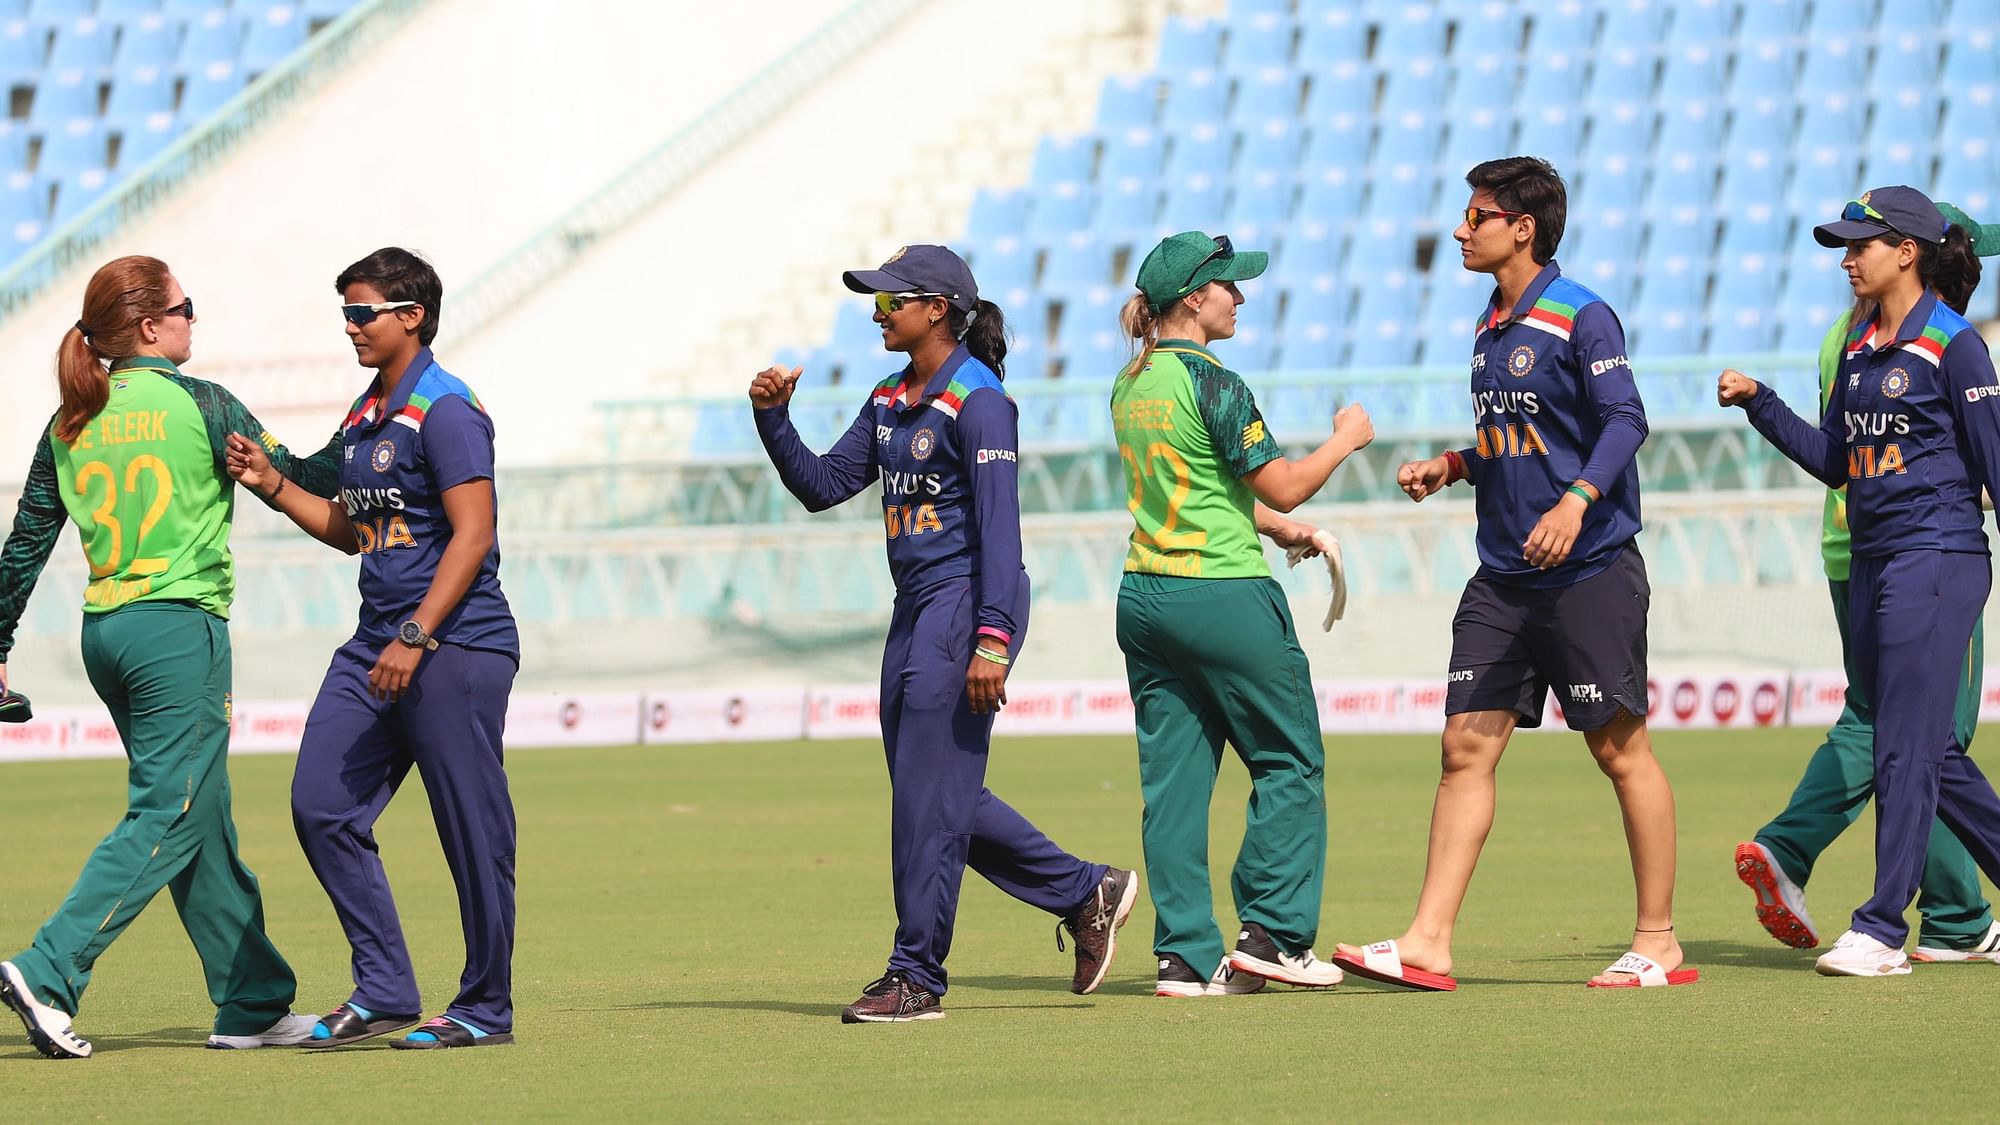 South Africa’s women’s team have taken a 2-1 lead in the five match series against India.